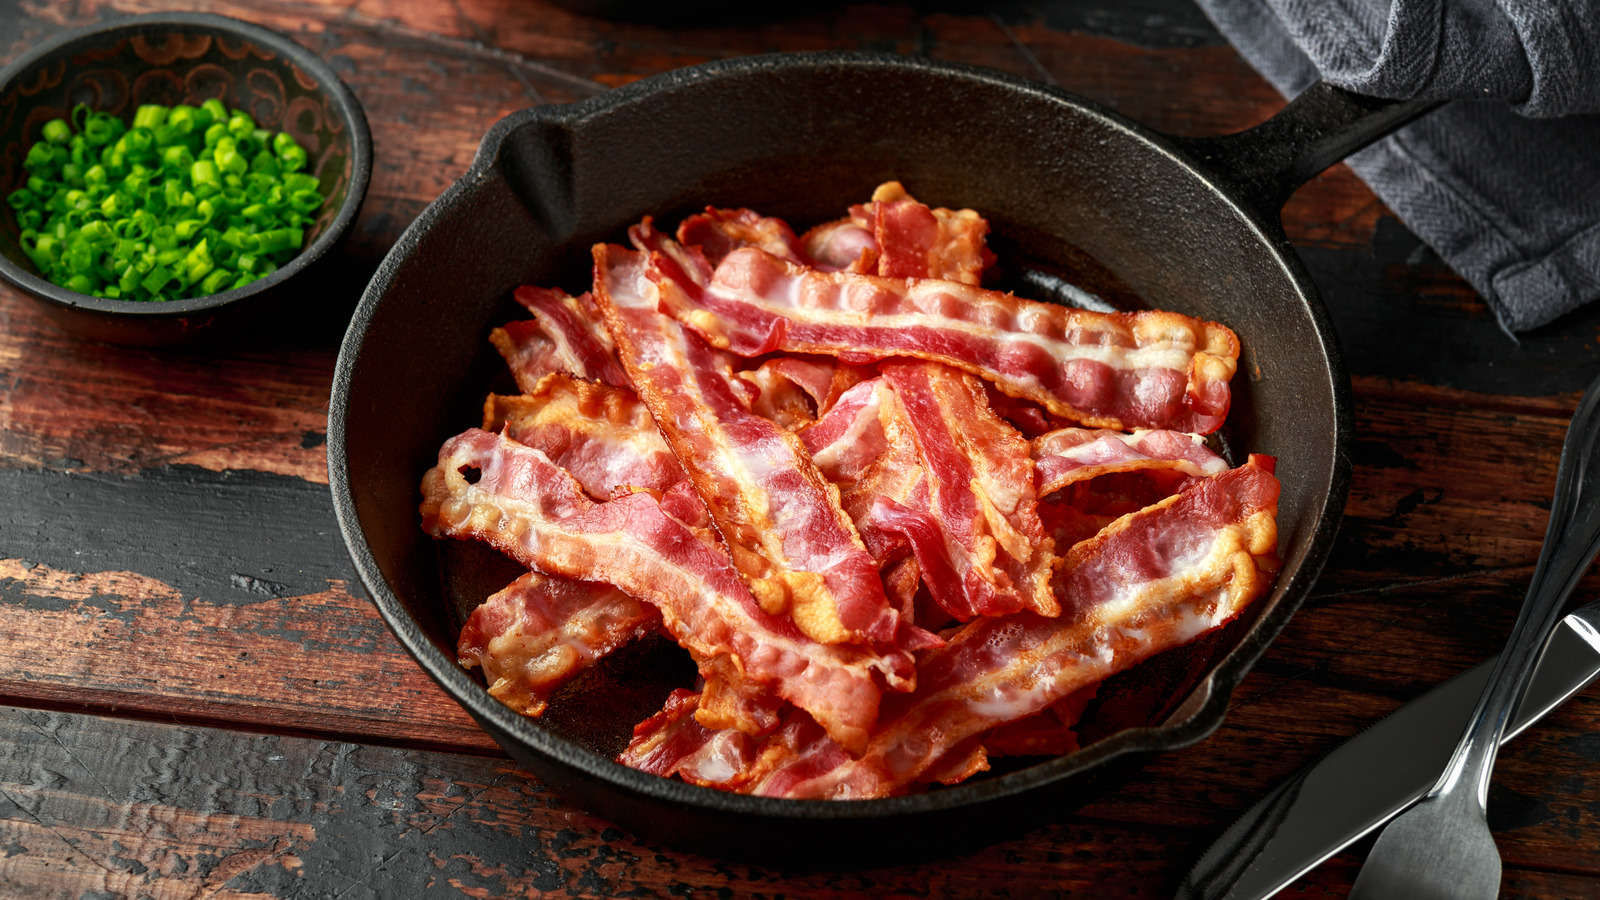 https://www.tastingtable.com/img/gallery/what-you-should-consider-before-cooking-bacon-on-the-stovetop/l-intro-1659036699.jpg